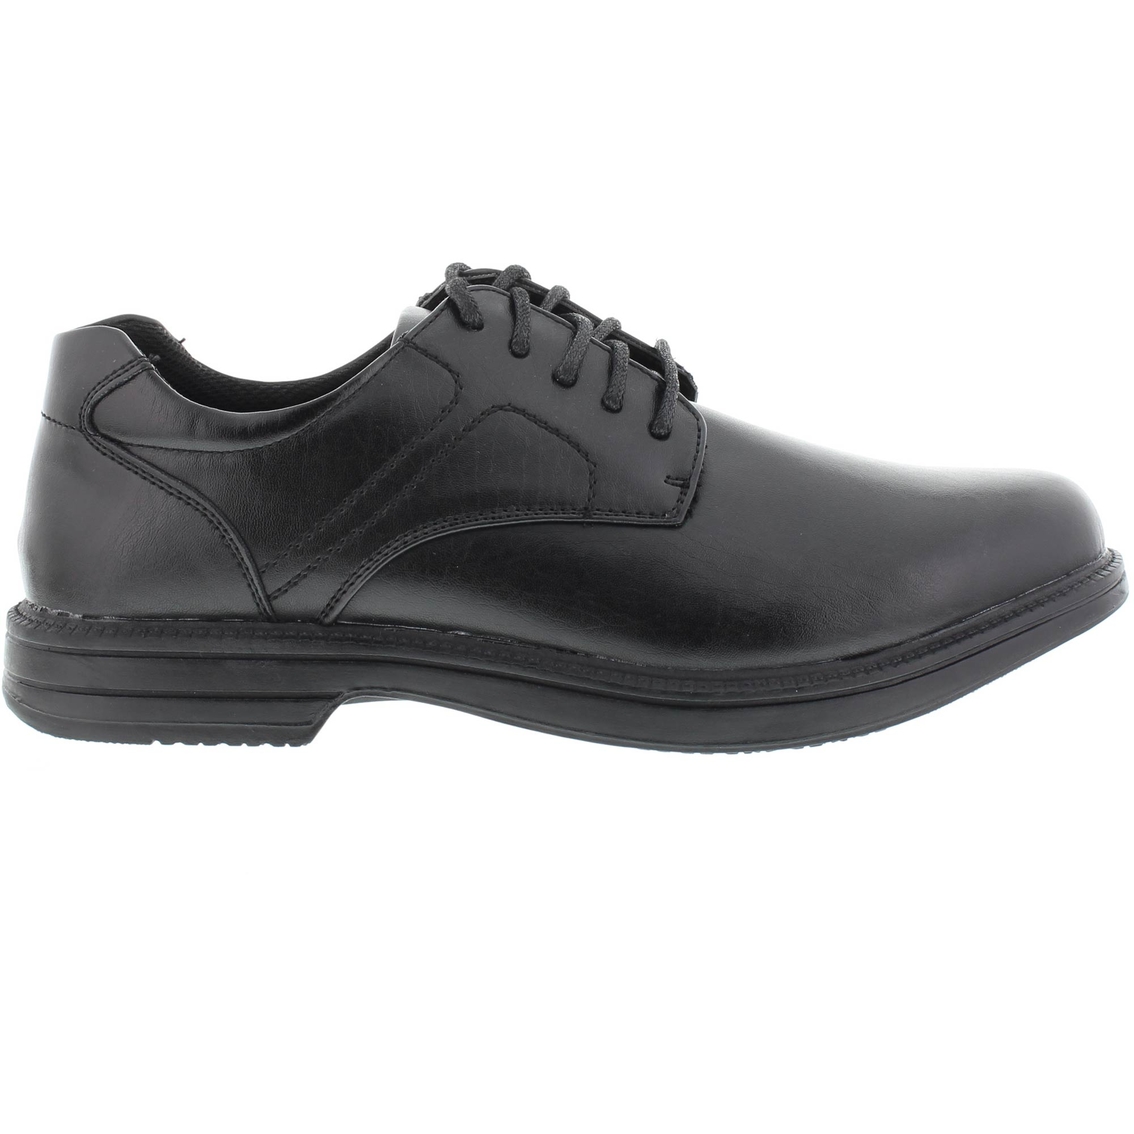 Deer Stags Nu Times Lace Up Oxford Shoes - Image 2 of 7